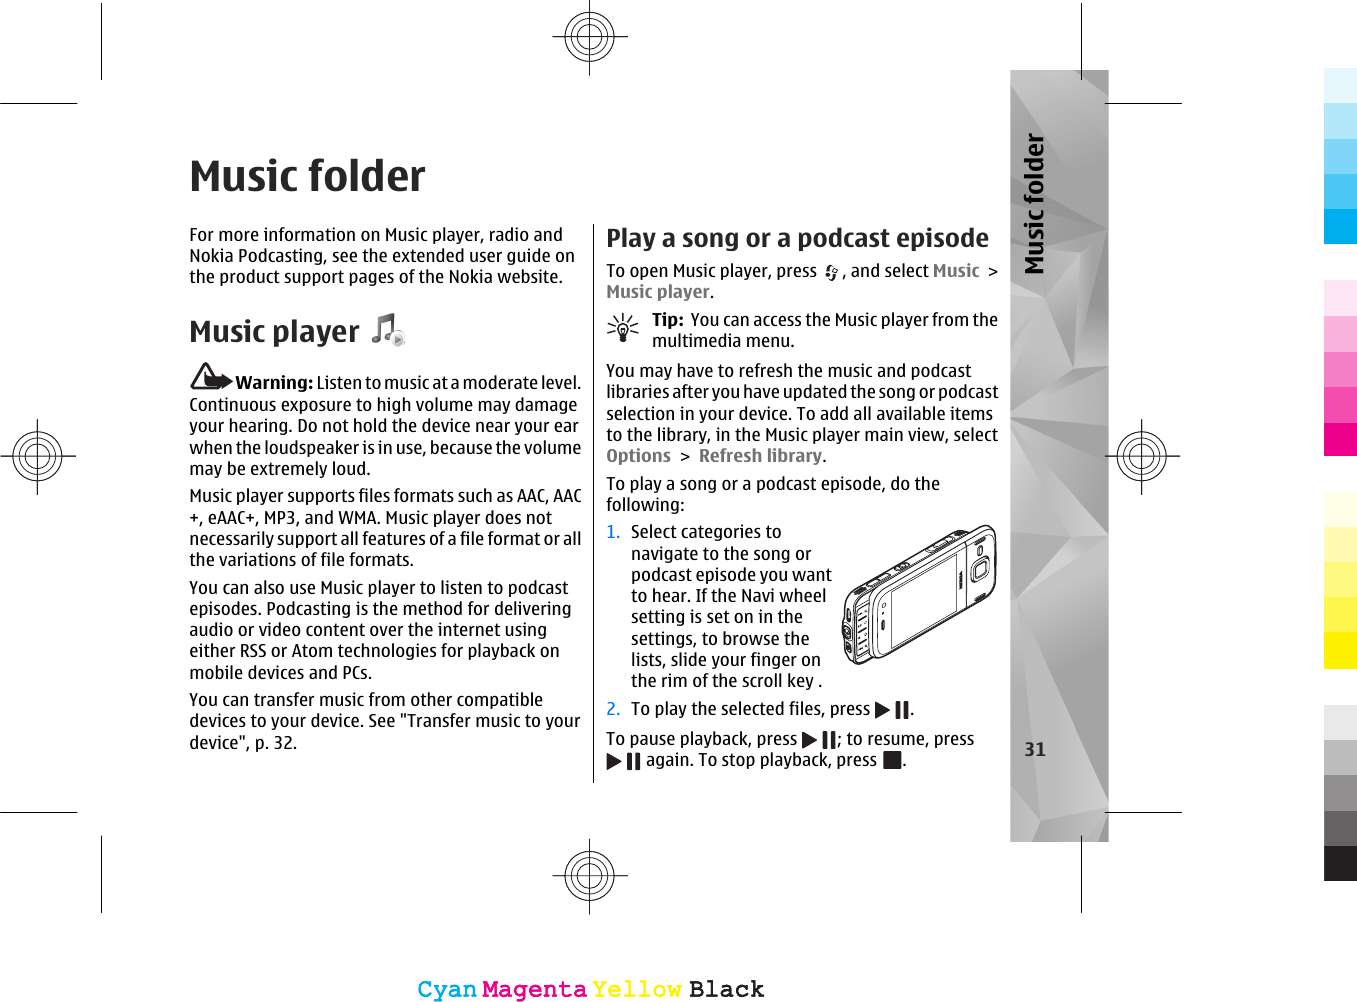 Music folderFor more information on Music player, radio andNokia Podcasting, see the extended user guide onthe product support pages of the Nokia website.Music playerWarning: Listen to music at a moderate level.Continuous exposure to high volume may damageyour hearing. Do not hold the device near your earwhen the loudspeaker is in use, because the volumemay be extremely loud.Music player supports files formats such as AAC, AAC+, eAAC+, MP3, and WMA. Music player does notnecessarily support all features of a file format or allthe variations of file formats.You can also use Music player to listen to podcastepisodes. Podcasting is the method for deliveringaudio or video content over the internet usingeither RSS or Atom technologies for playback onmobile devices and PCs.You can transfer music from other compatibledevices to your device. See &quot;Transfer music to yourdevice&quot;, p. 32.Play a song or a podcast episodeTo open Music player, press  , and select Music &gt;Music player.Tip:  You can access the Music player from themultimedia menu.You may have to refresh the music and podcastlibraries after you have updated the song or podcastselection in your device. To add all available itemsto the library, in the Music player main view, selectOptions &gt; Refresh library.To play a song or a podcast episode, do thefollowing:1. Select categories tonavigate to the song orpodcast episode you wantto hear. If the Navi wheelsetting is set on in thesettings, to browse thelists, slide your finger onthe rim of the scroll key .2. To play the selected files, press  .To pause playback, press  ; to resume, press again. To stop playback, press  .31Music folderCyanCyanMagentaMagentaYellowYellowBlackBlackCyanCyanMagentaMagentaYellowYellowBlackBlack